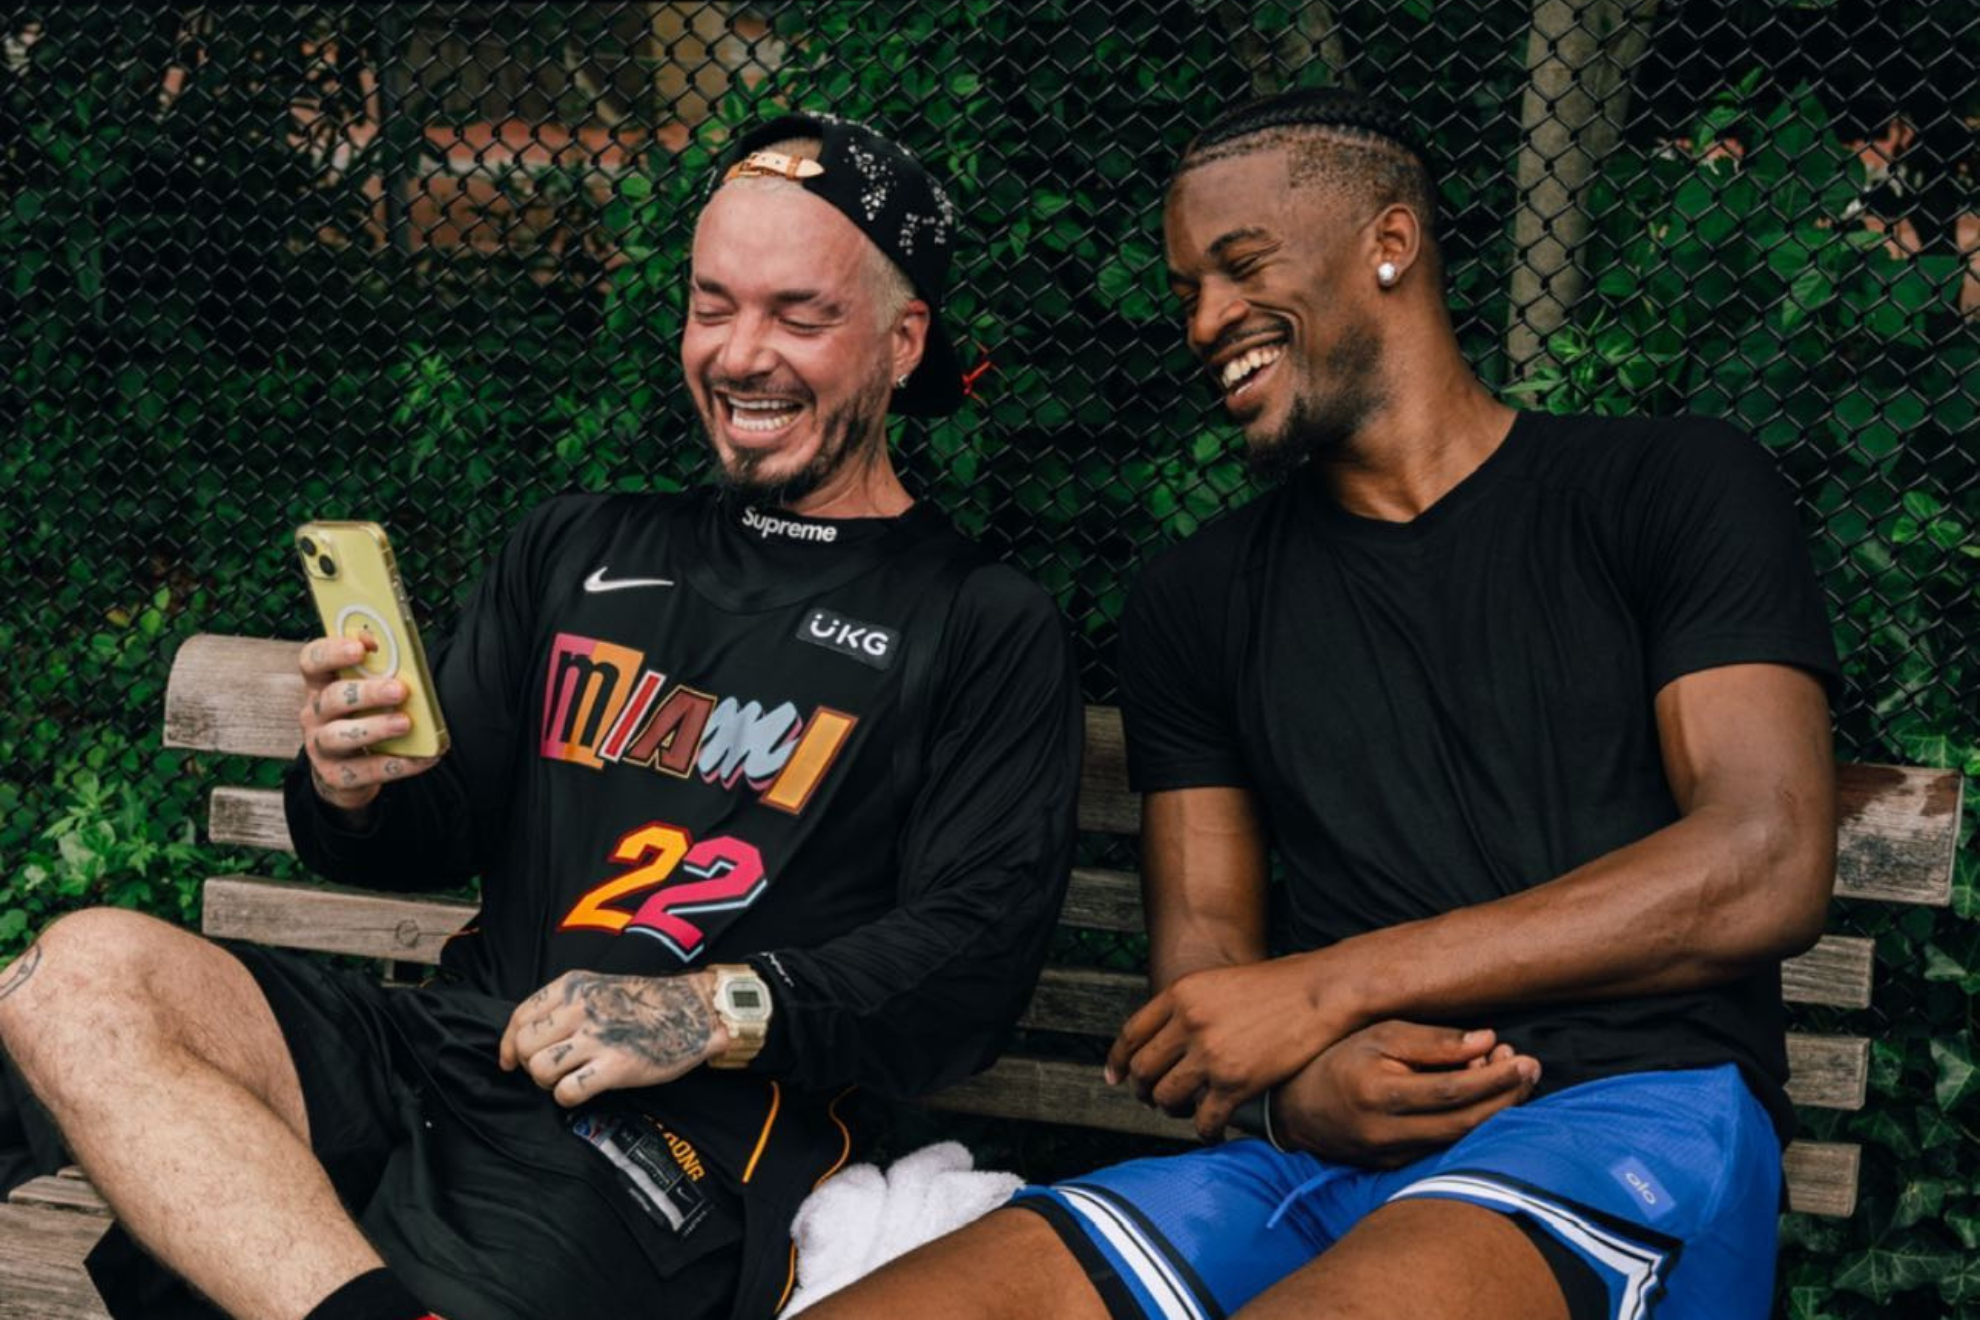 Jimmy Butler and J Balvin beat a whole team by themselves